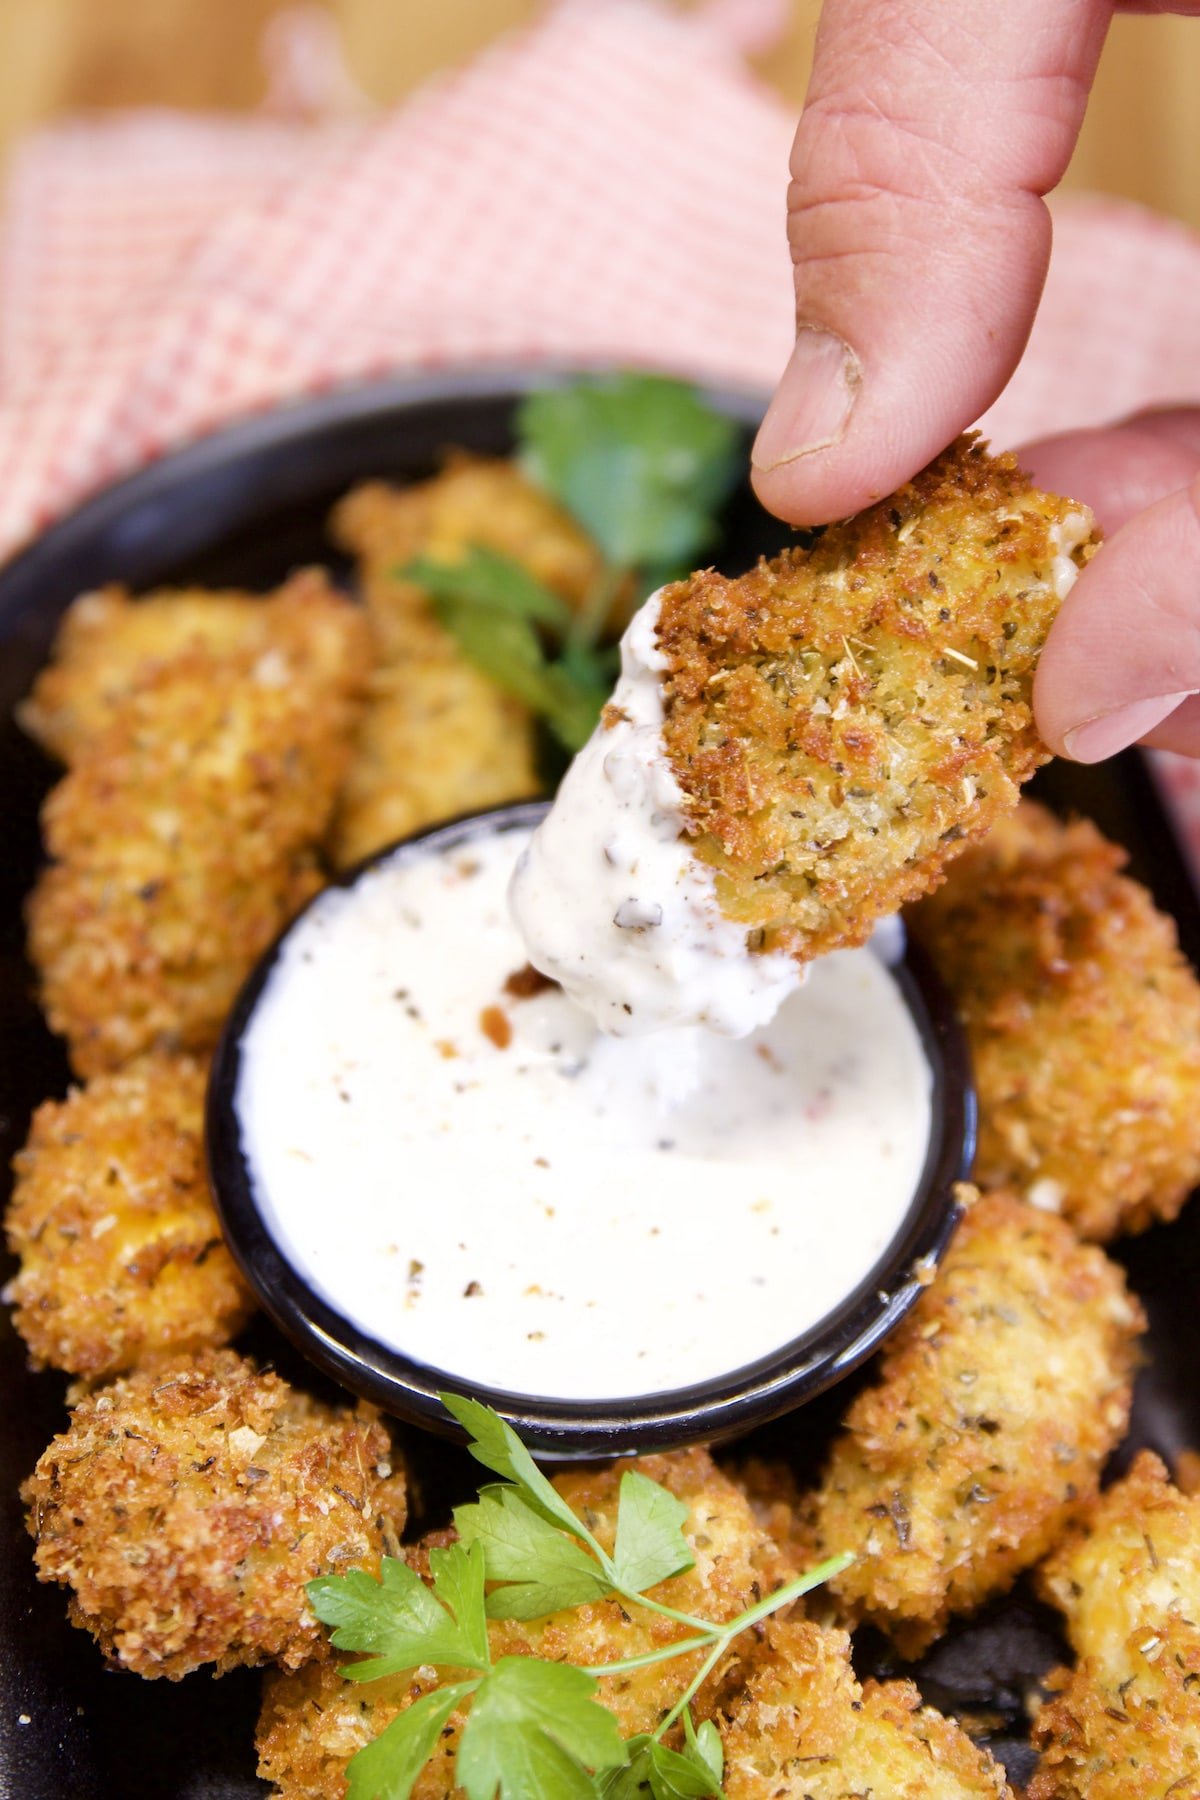 Fried cheese curd dipping into ranch.